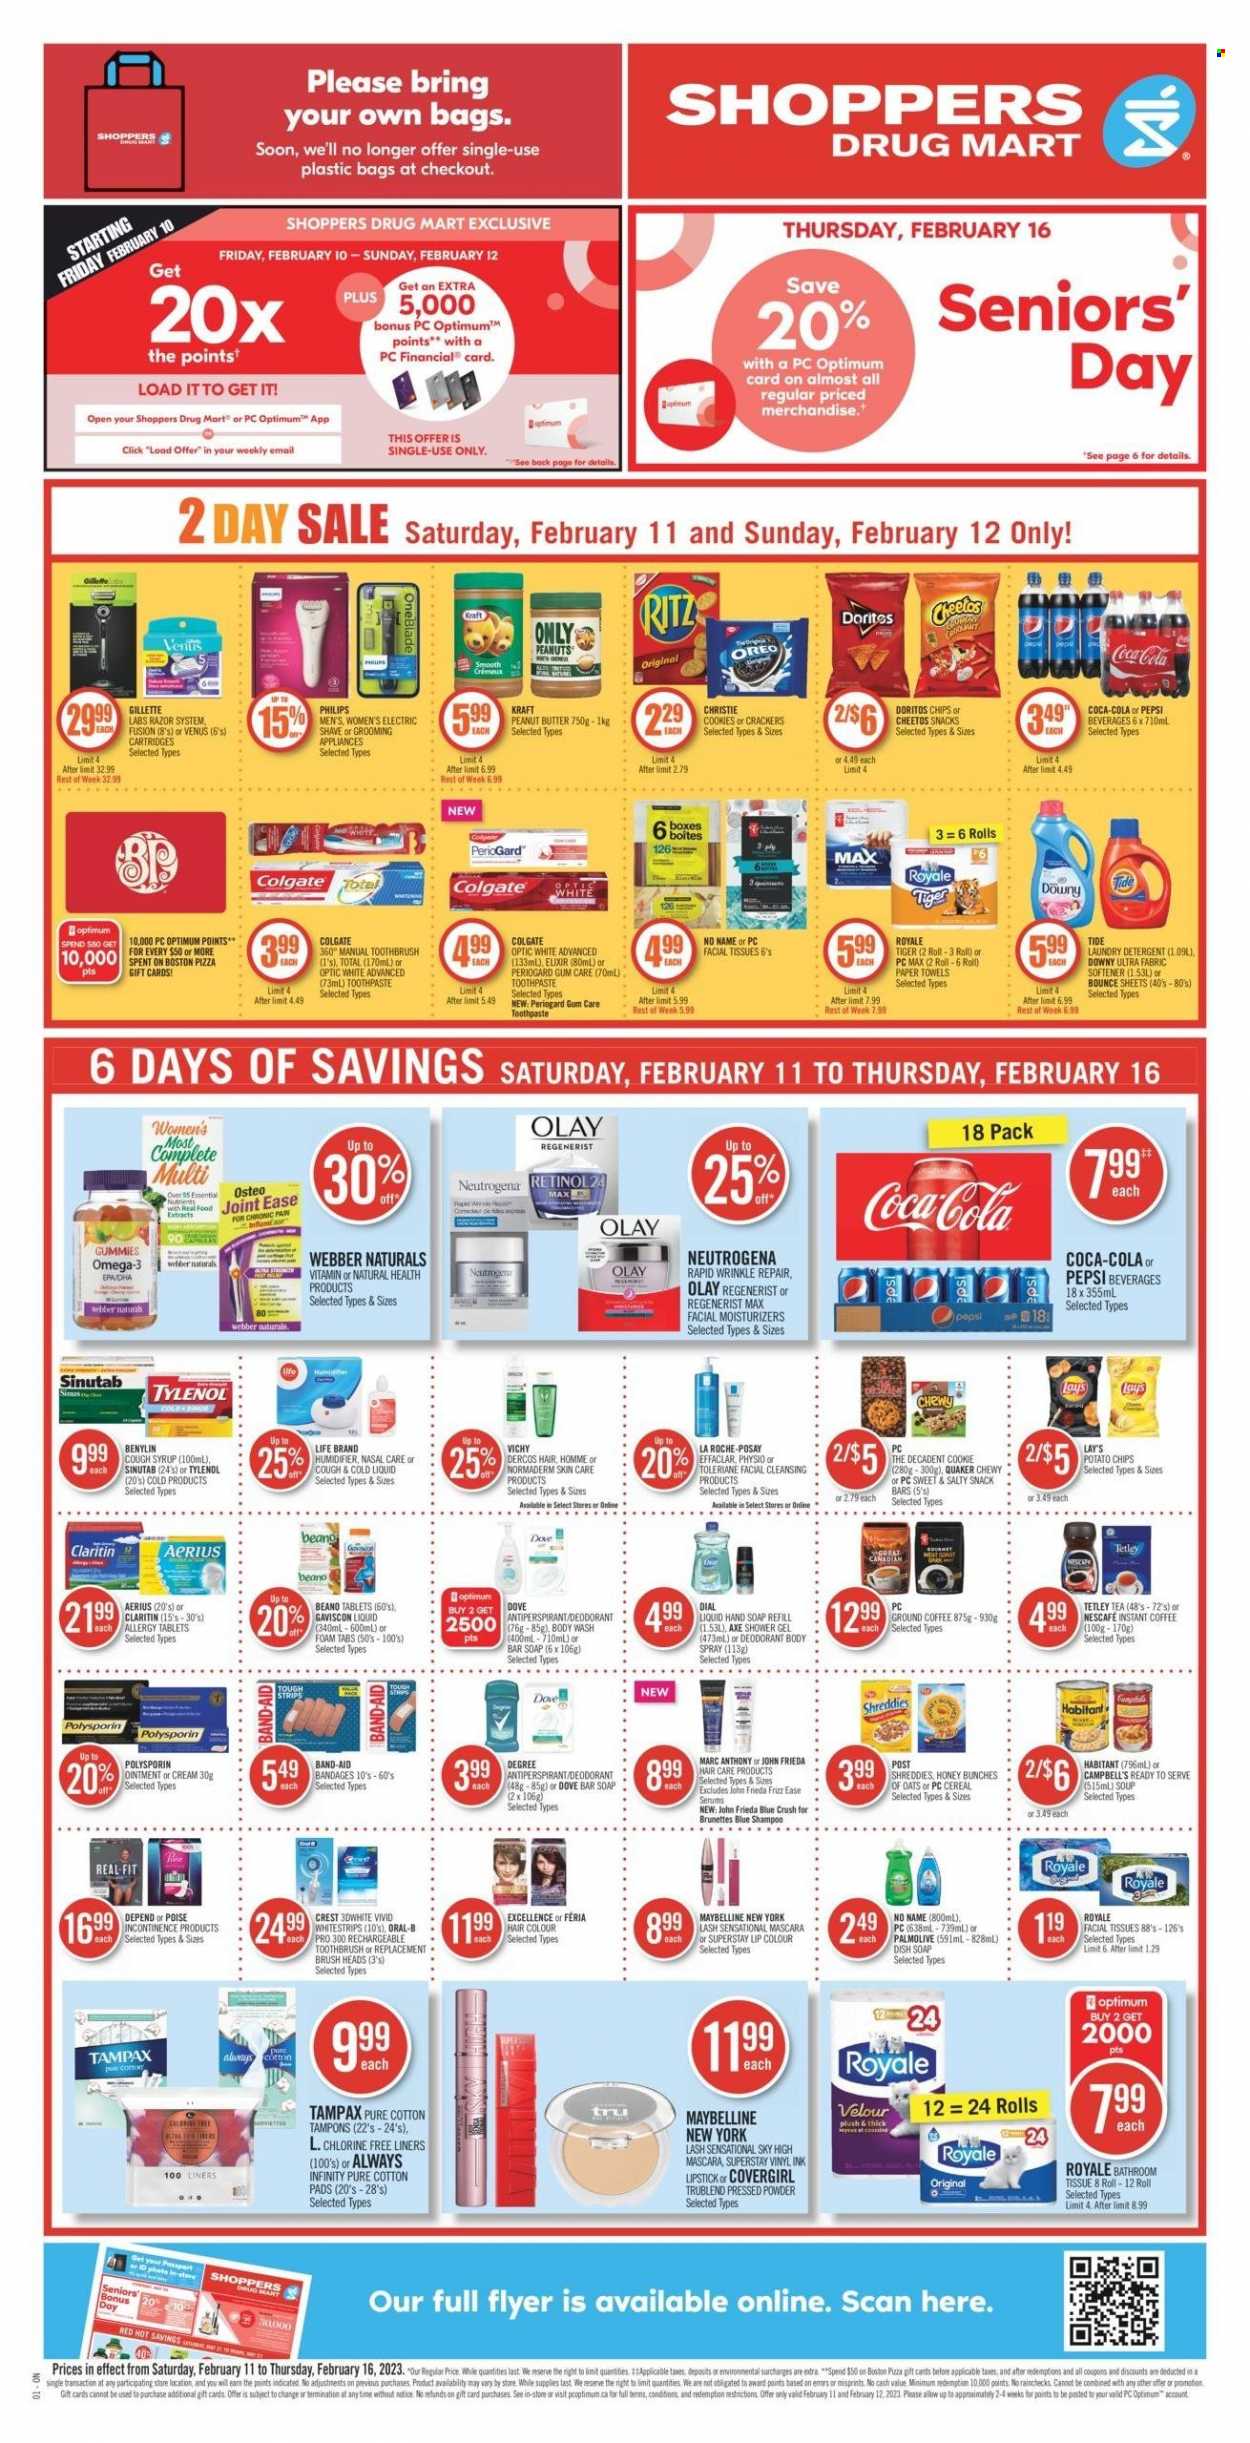 thumbnail - Shoppers Drug Mart Flyer - February 11, 2023 - February 16, 2023 - Sales products - Philips, No Name, Campbell's, pizza, soup, Quaker, Kraft®, cookies, Dove, snack, crackers, RITZ, Doritos, potato chips, Cheetos, chips, Lay’s, cereals, peanut butter, syrup, peanuts, Coca-Cola, Pepsi, tea, coffee, instant coffee, ground coffee, ointment, bath tissue, kitchen towels, paper towels, Tide, fabric softener, laundry detergent, Bounce, Downy Laundry, body wash, shower gel, Vichy, hand soap, Palmolive, soap bar, Dial, soap, toothbrush, toothpaste, Crest, tampons, Always Infinity, facial tissues, Gillette, La Roche-Posay, moisturizer, Olay, hair color, John Frieda, body spray, anti-perspirant, Axe, razor, Venus, bag, lipstick, mascara, Maybelline, face powder, Optimum, humidifier, Tylenol, Omega-3, Gaviscon, Benylin, band-aid, detergent, Colgate, Neutrogena, shampoo, Tampax, Oreo, Oral-B, Nescafé, deodorant. Page 1.